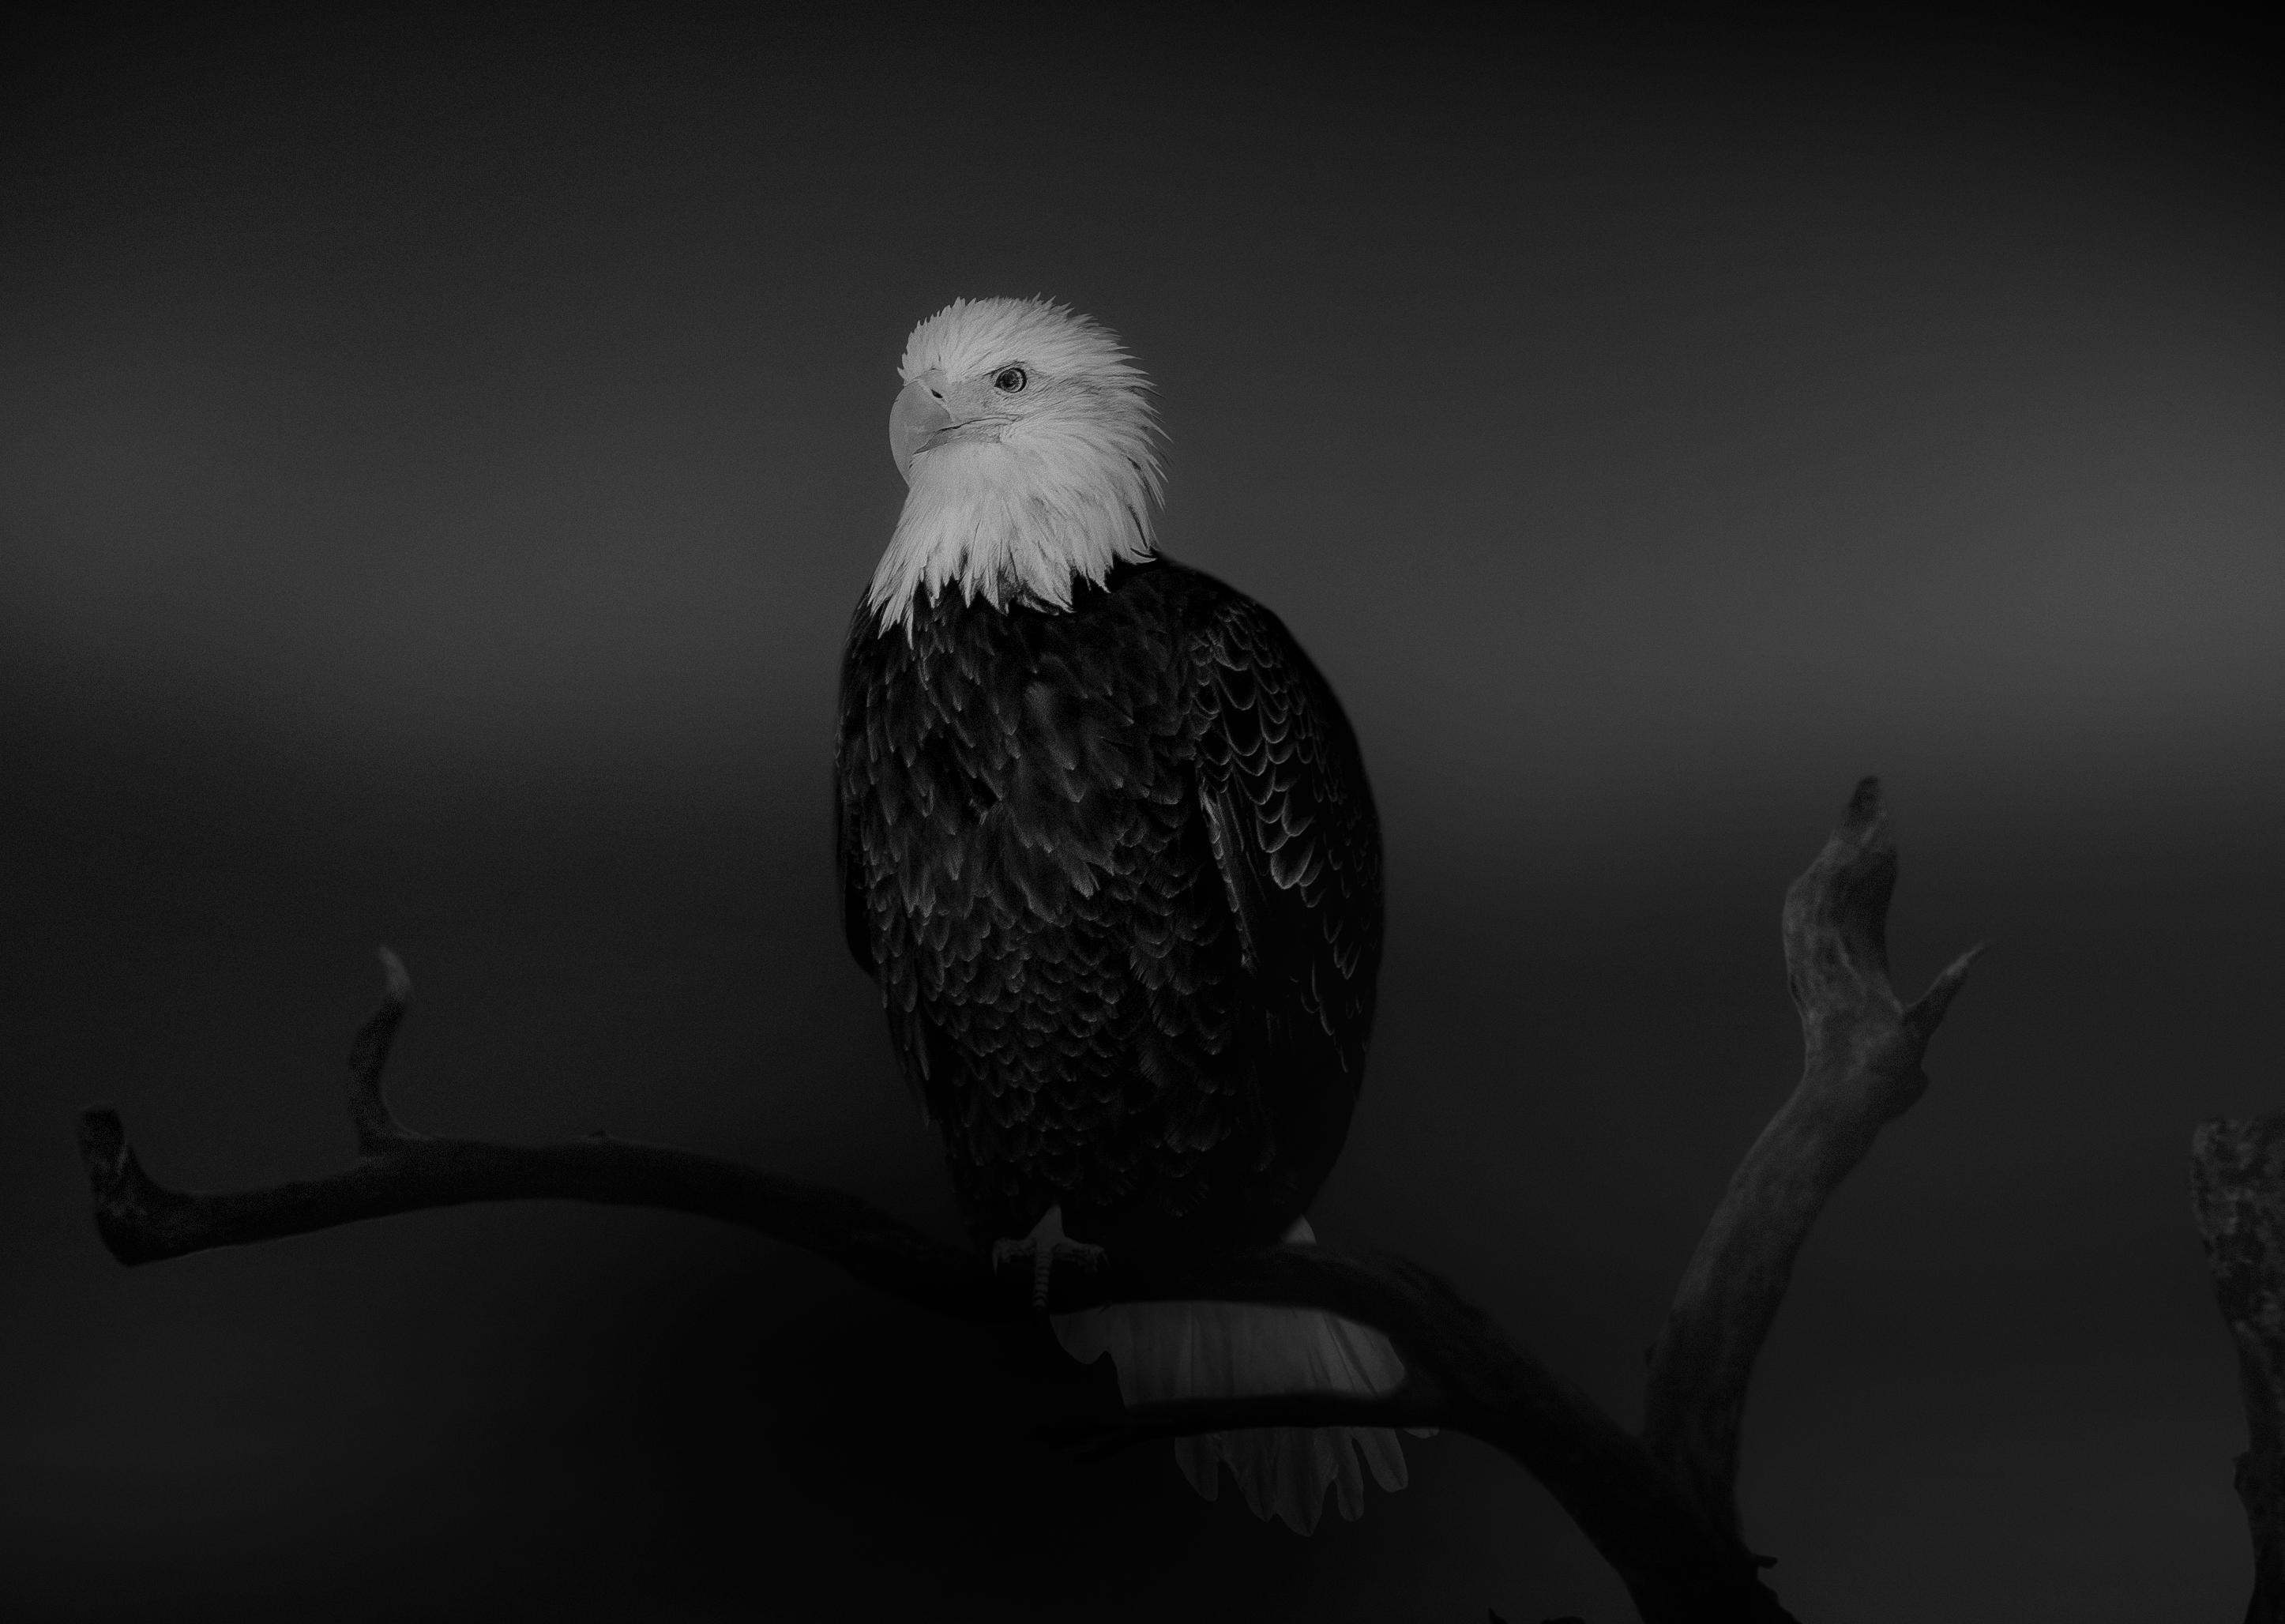 This is a contemporary photograph of an American Bald Eagle
24x36 Edition of 50. Signed by Shane. 
Printed on archival paper and using archival inks
Framing available. Inquire for rates. 


Shane Russeck has built a reputation for capturing